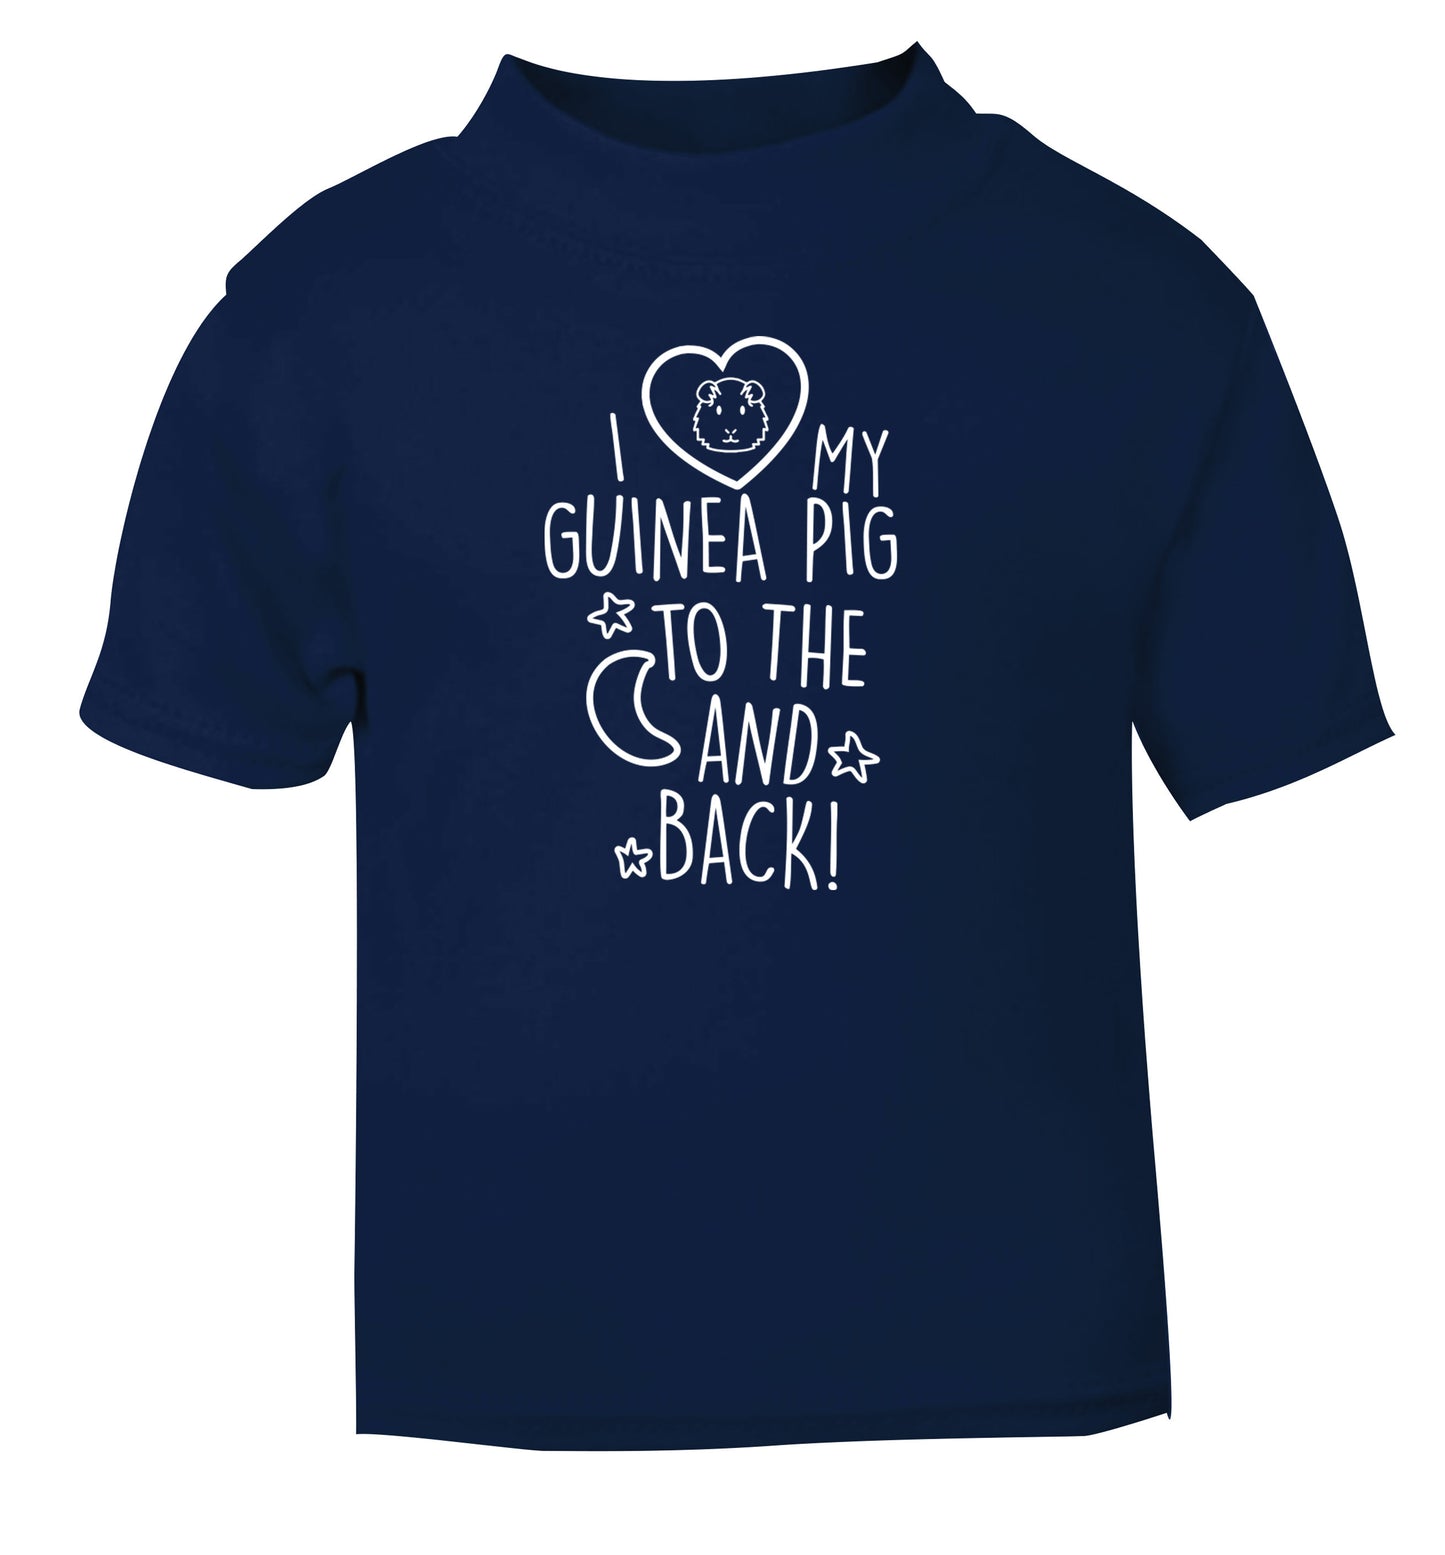 I love my guinea pig to the moon and back navy Baby Toddler Tshirt 2 Years